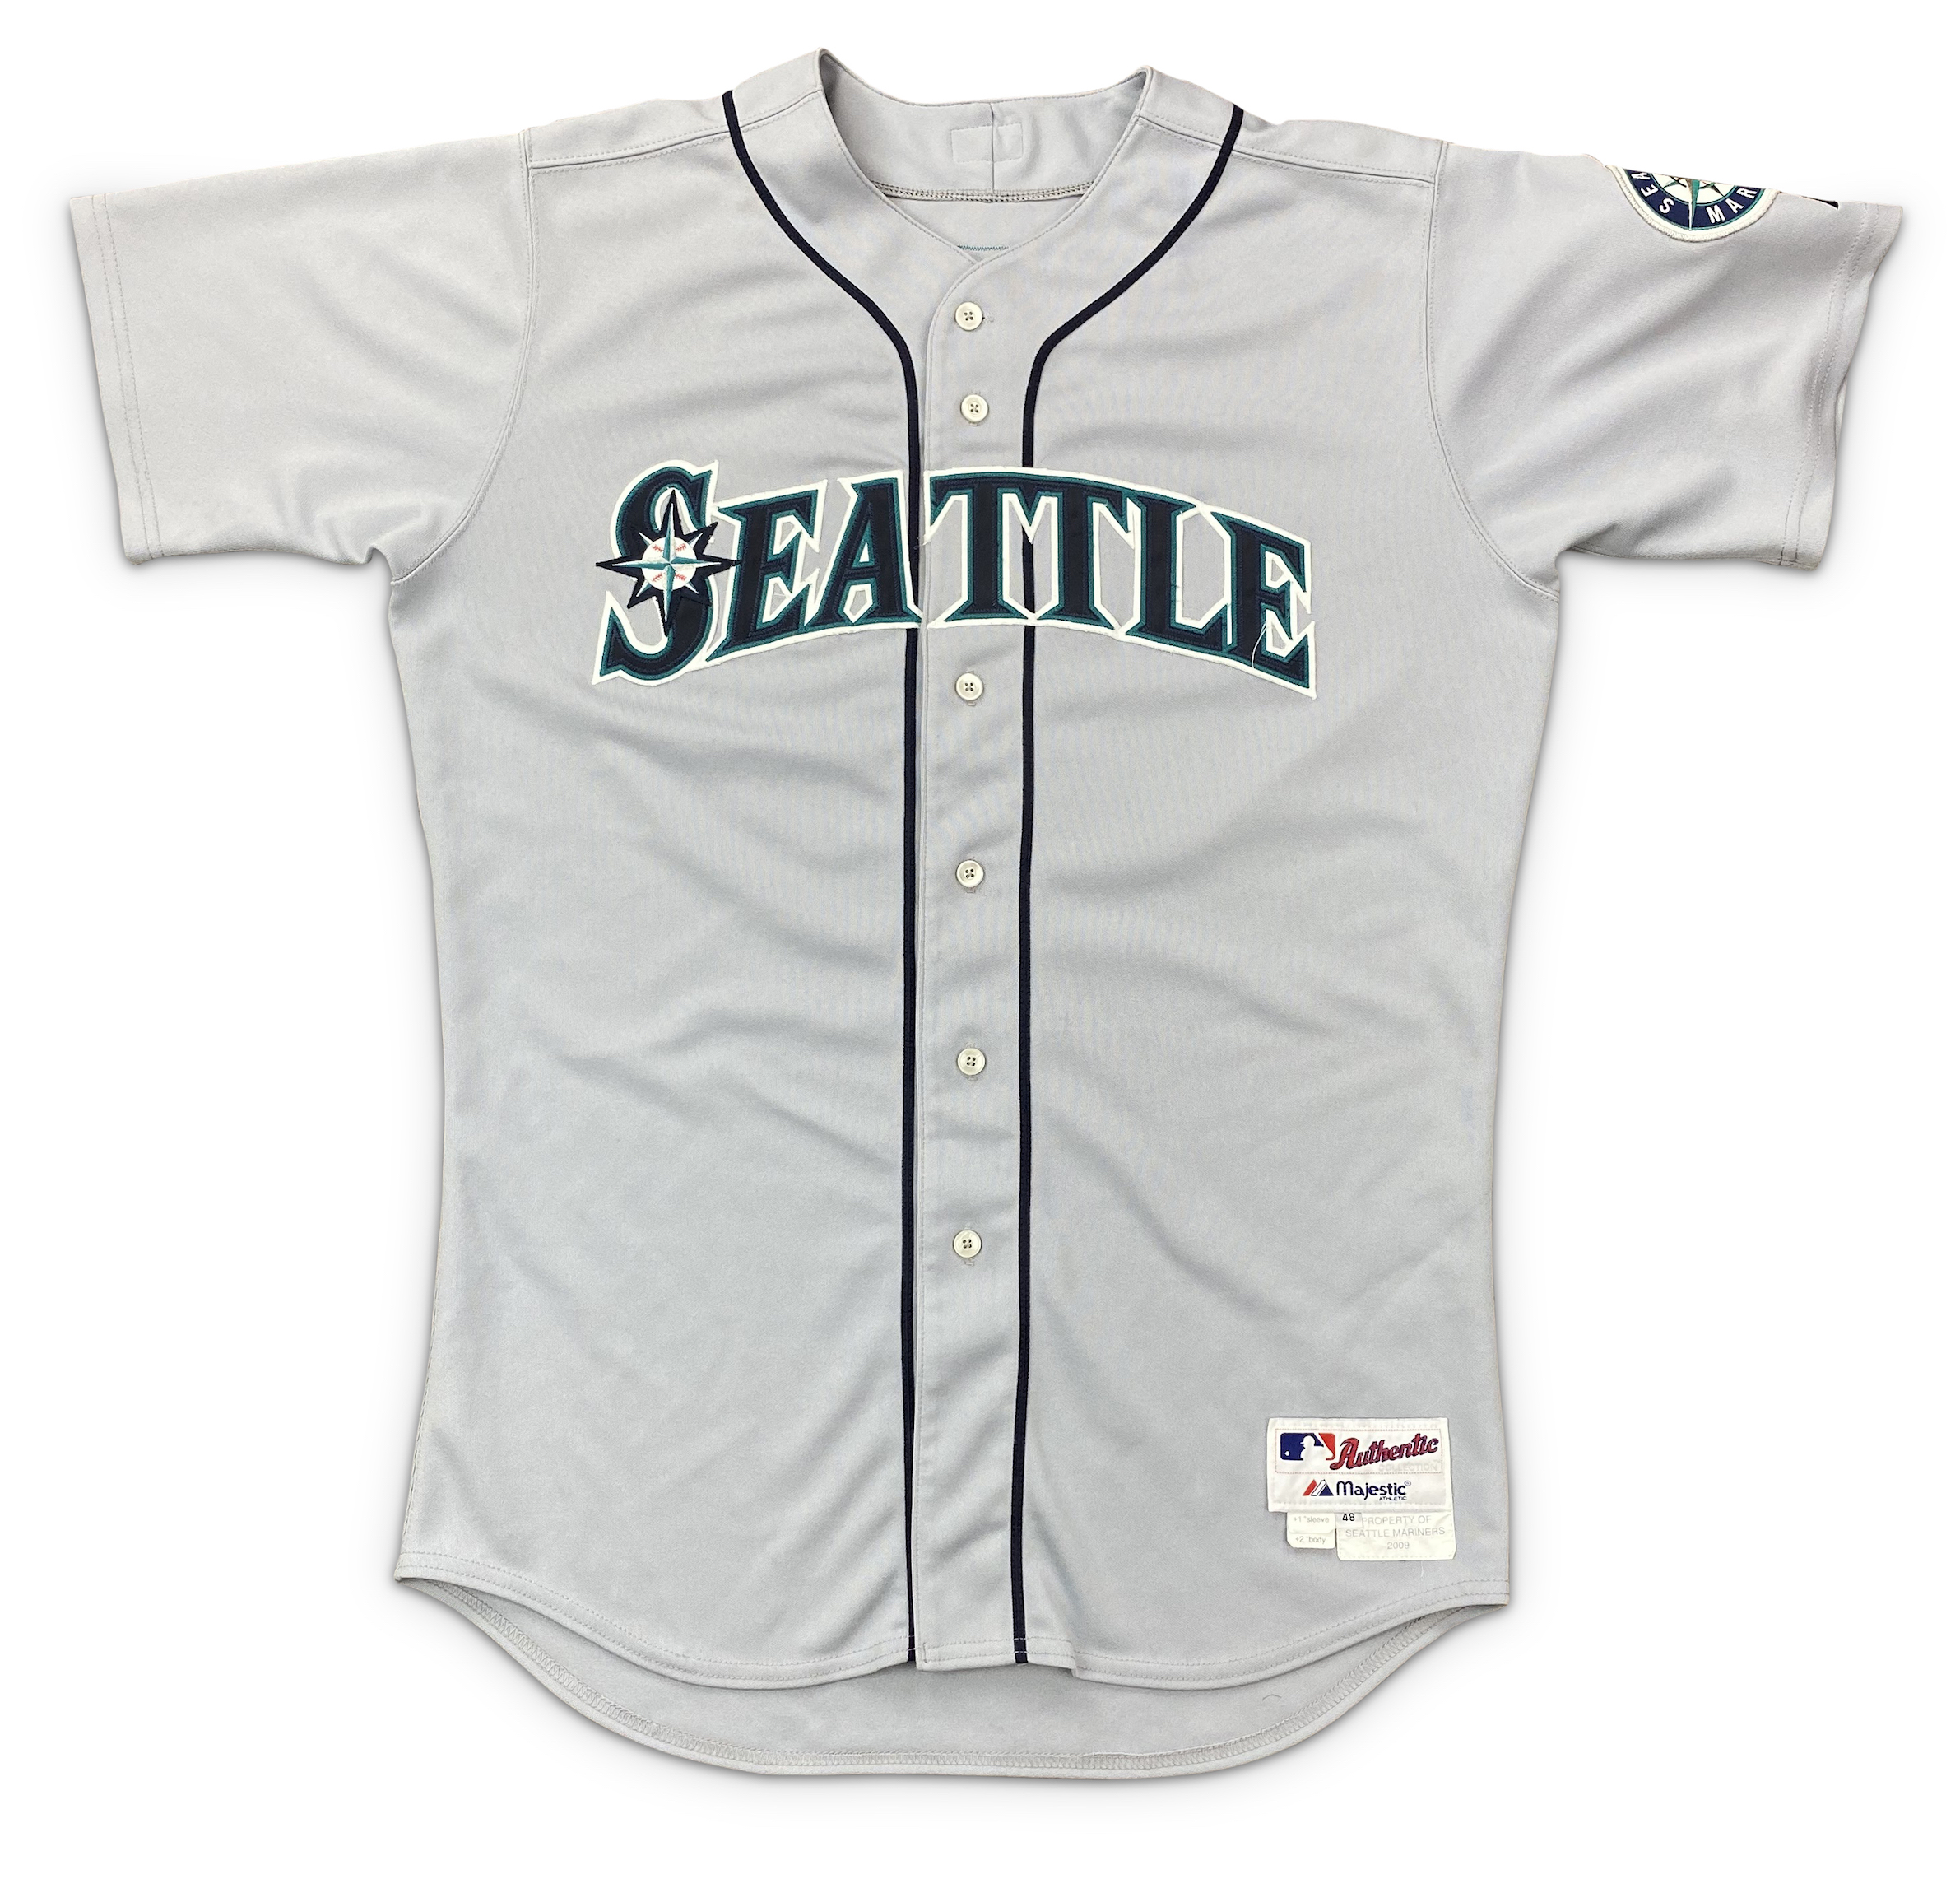 mariners jersey numbers 2019